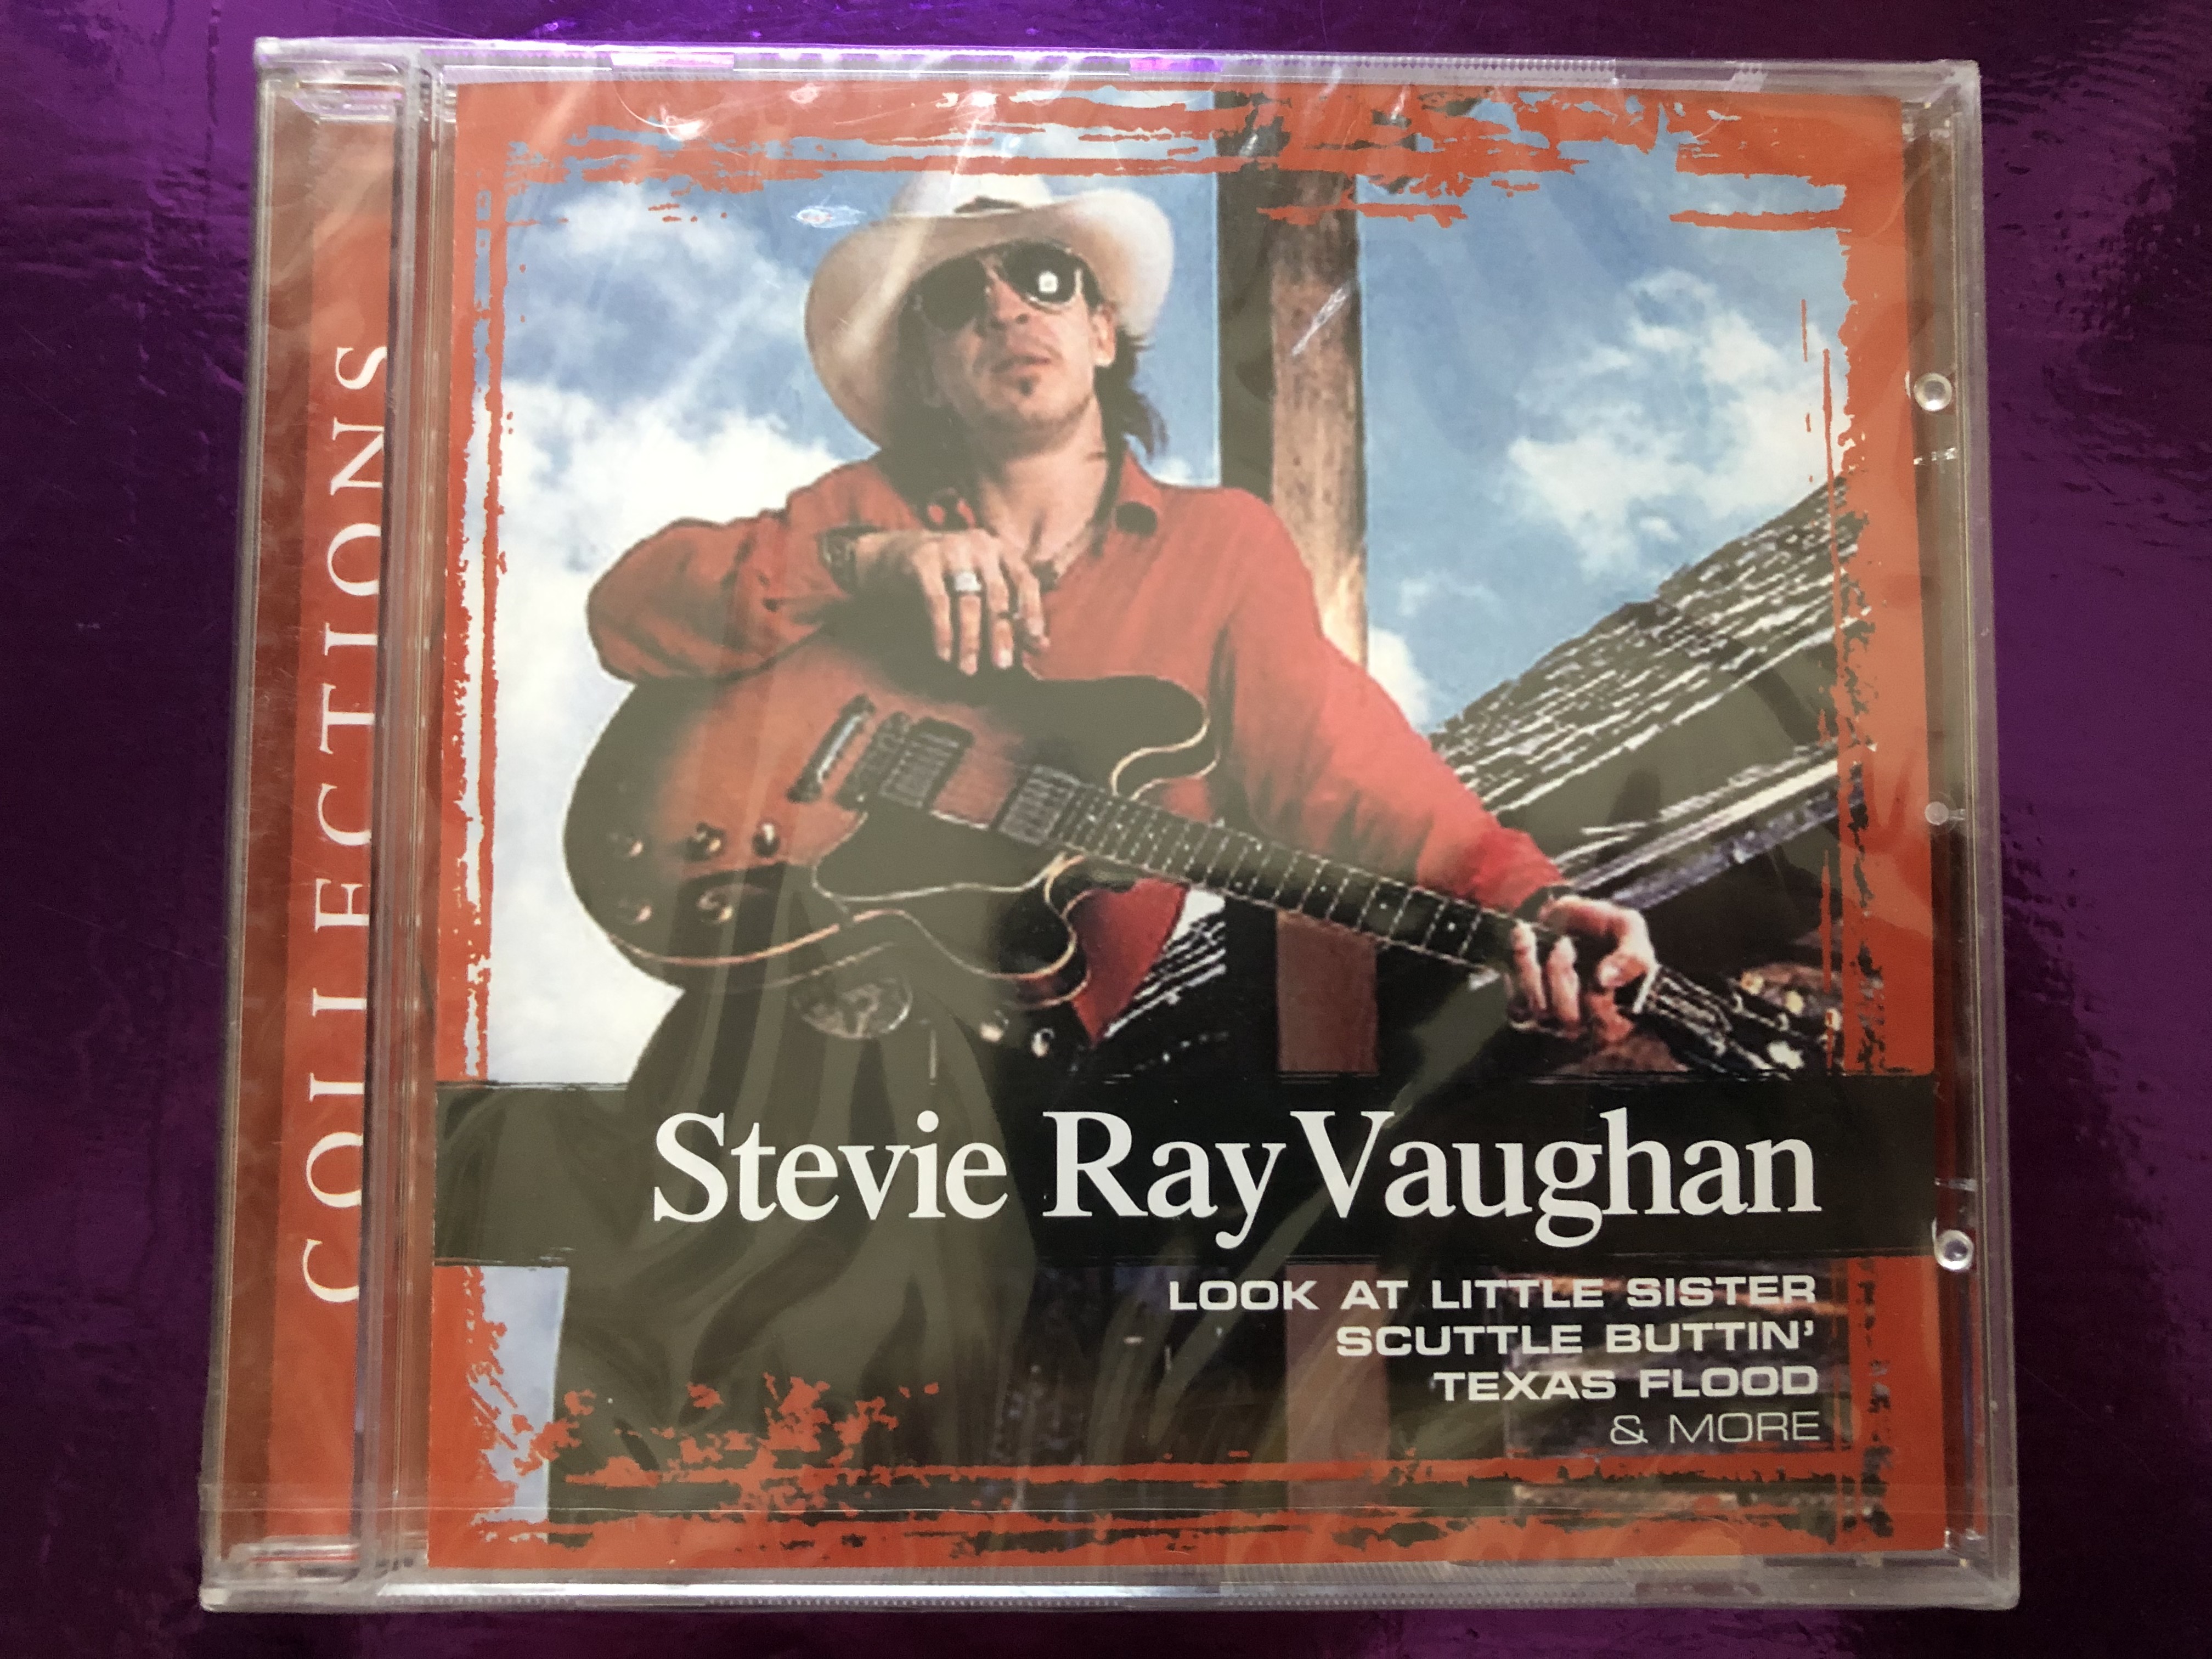 stevie-ray-vaughan-collections-look-at-little-sister-scuttle-buttin-texas-flood-more-sony-bmg-music-entertainment-audio-cd-2005-82876702132-1-.jpg